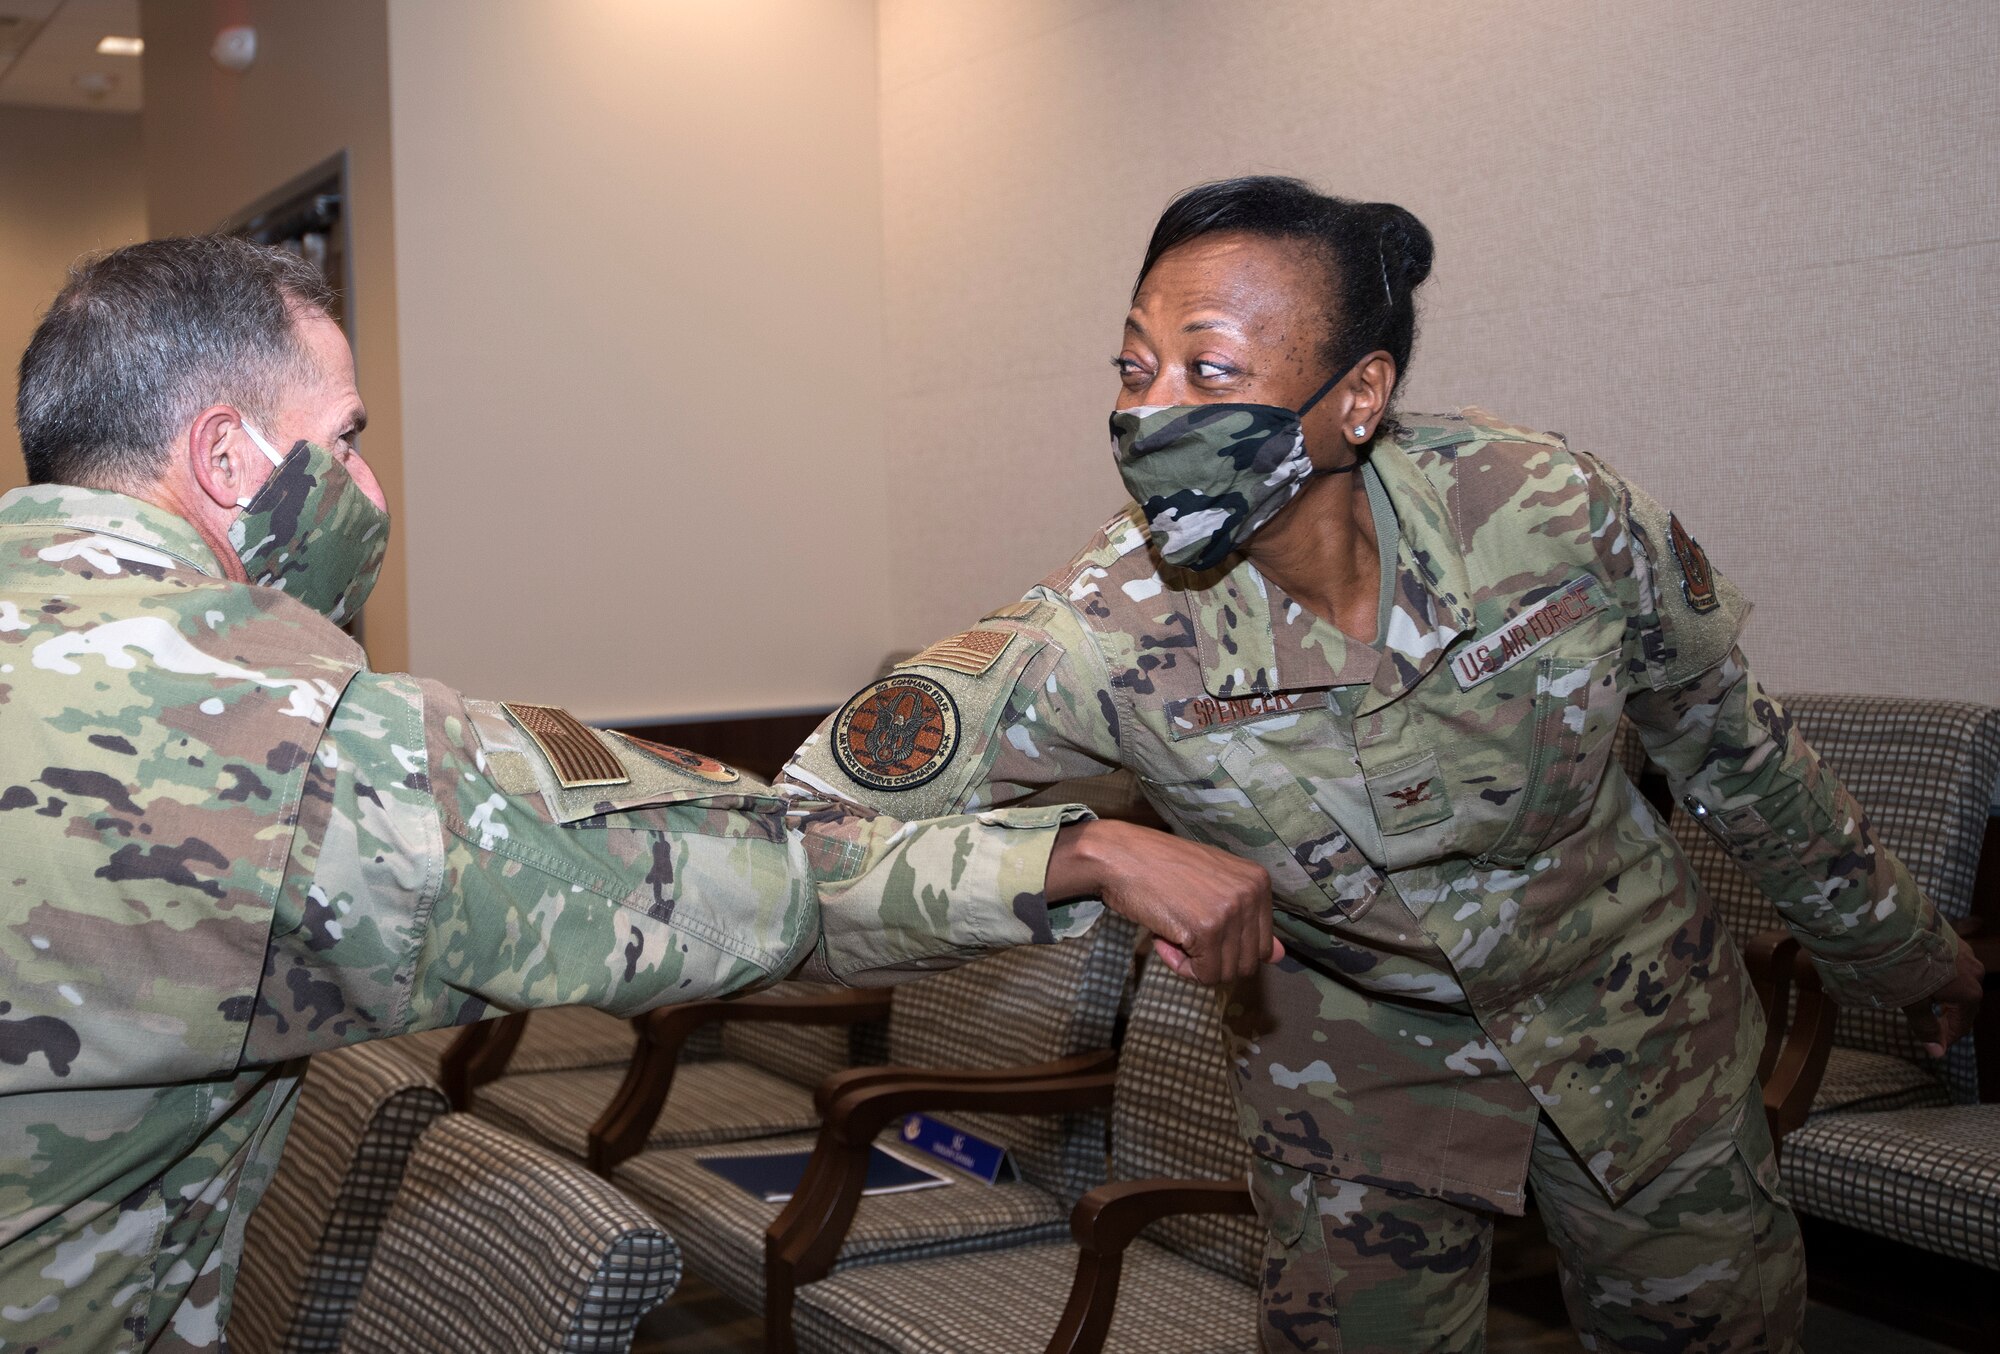 Photo of Air Force Chief of Staff Gen. David L. Goldfein, elbow bumping Col. Eltressa Spencer, Commanders Action Group Director for Air Force Reserve Command, as a greeting and a safety measure against COVID-19, at Robins Air Force Base, Georgia, June 24, 2020.